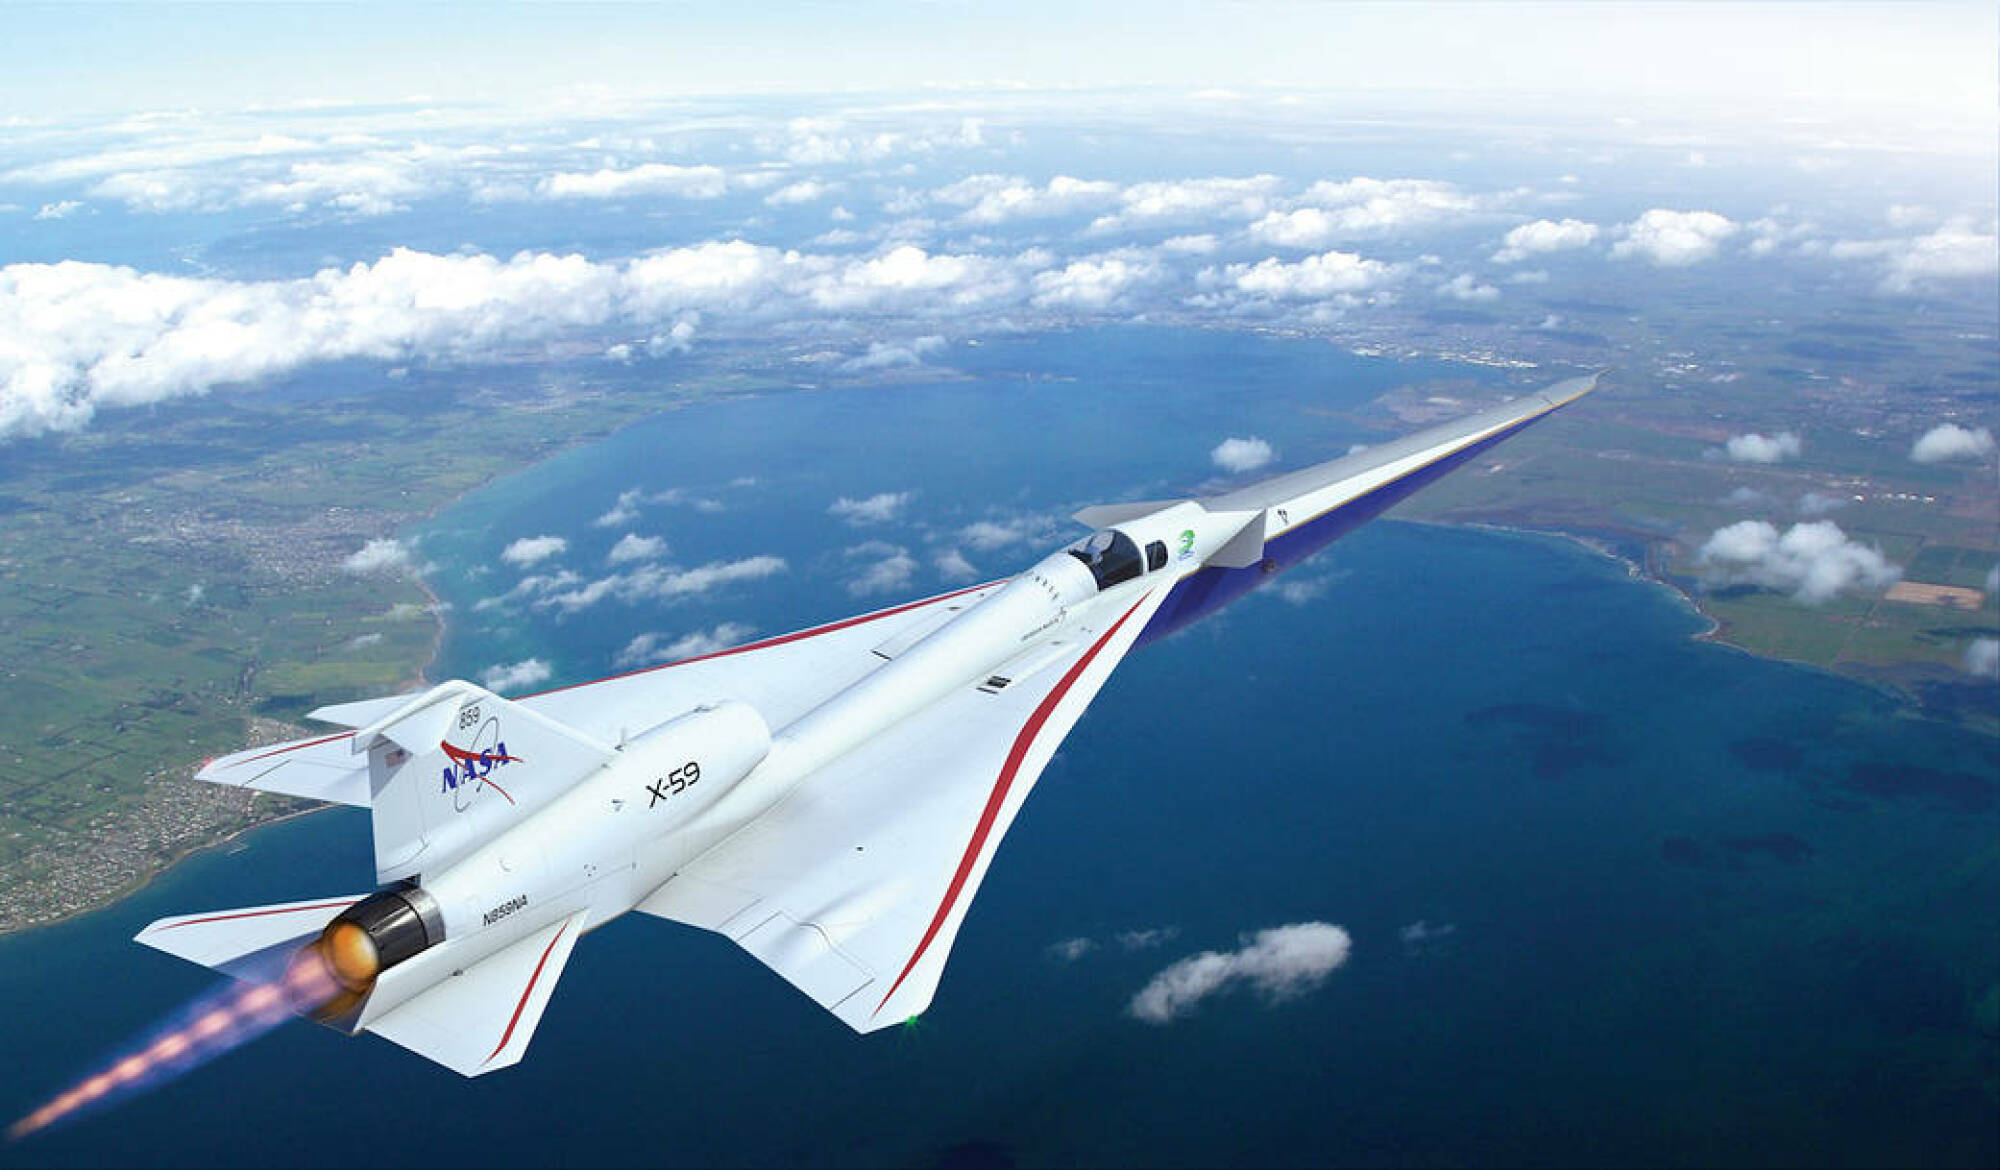 An artist's conception of the X-59 plane on a test flight over land in the U.S.